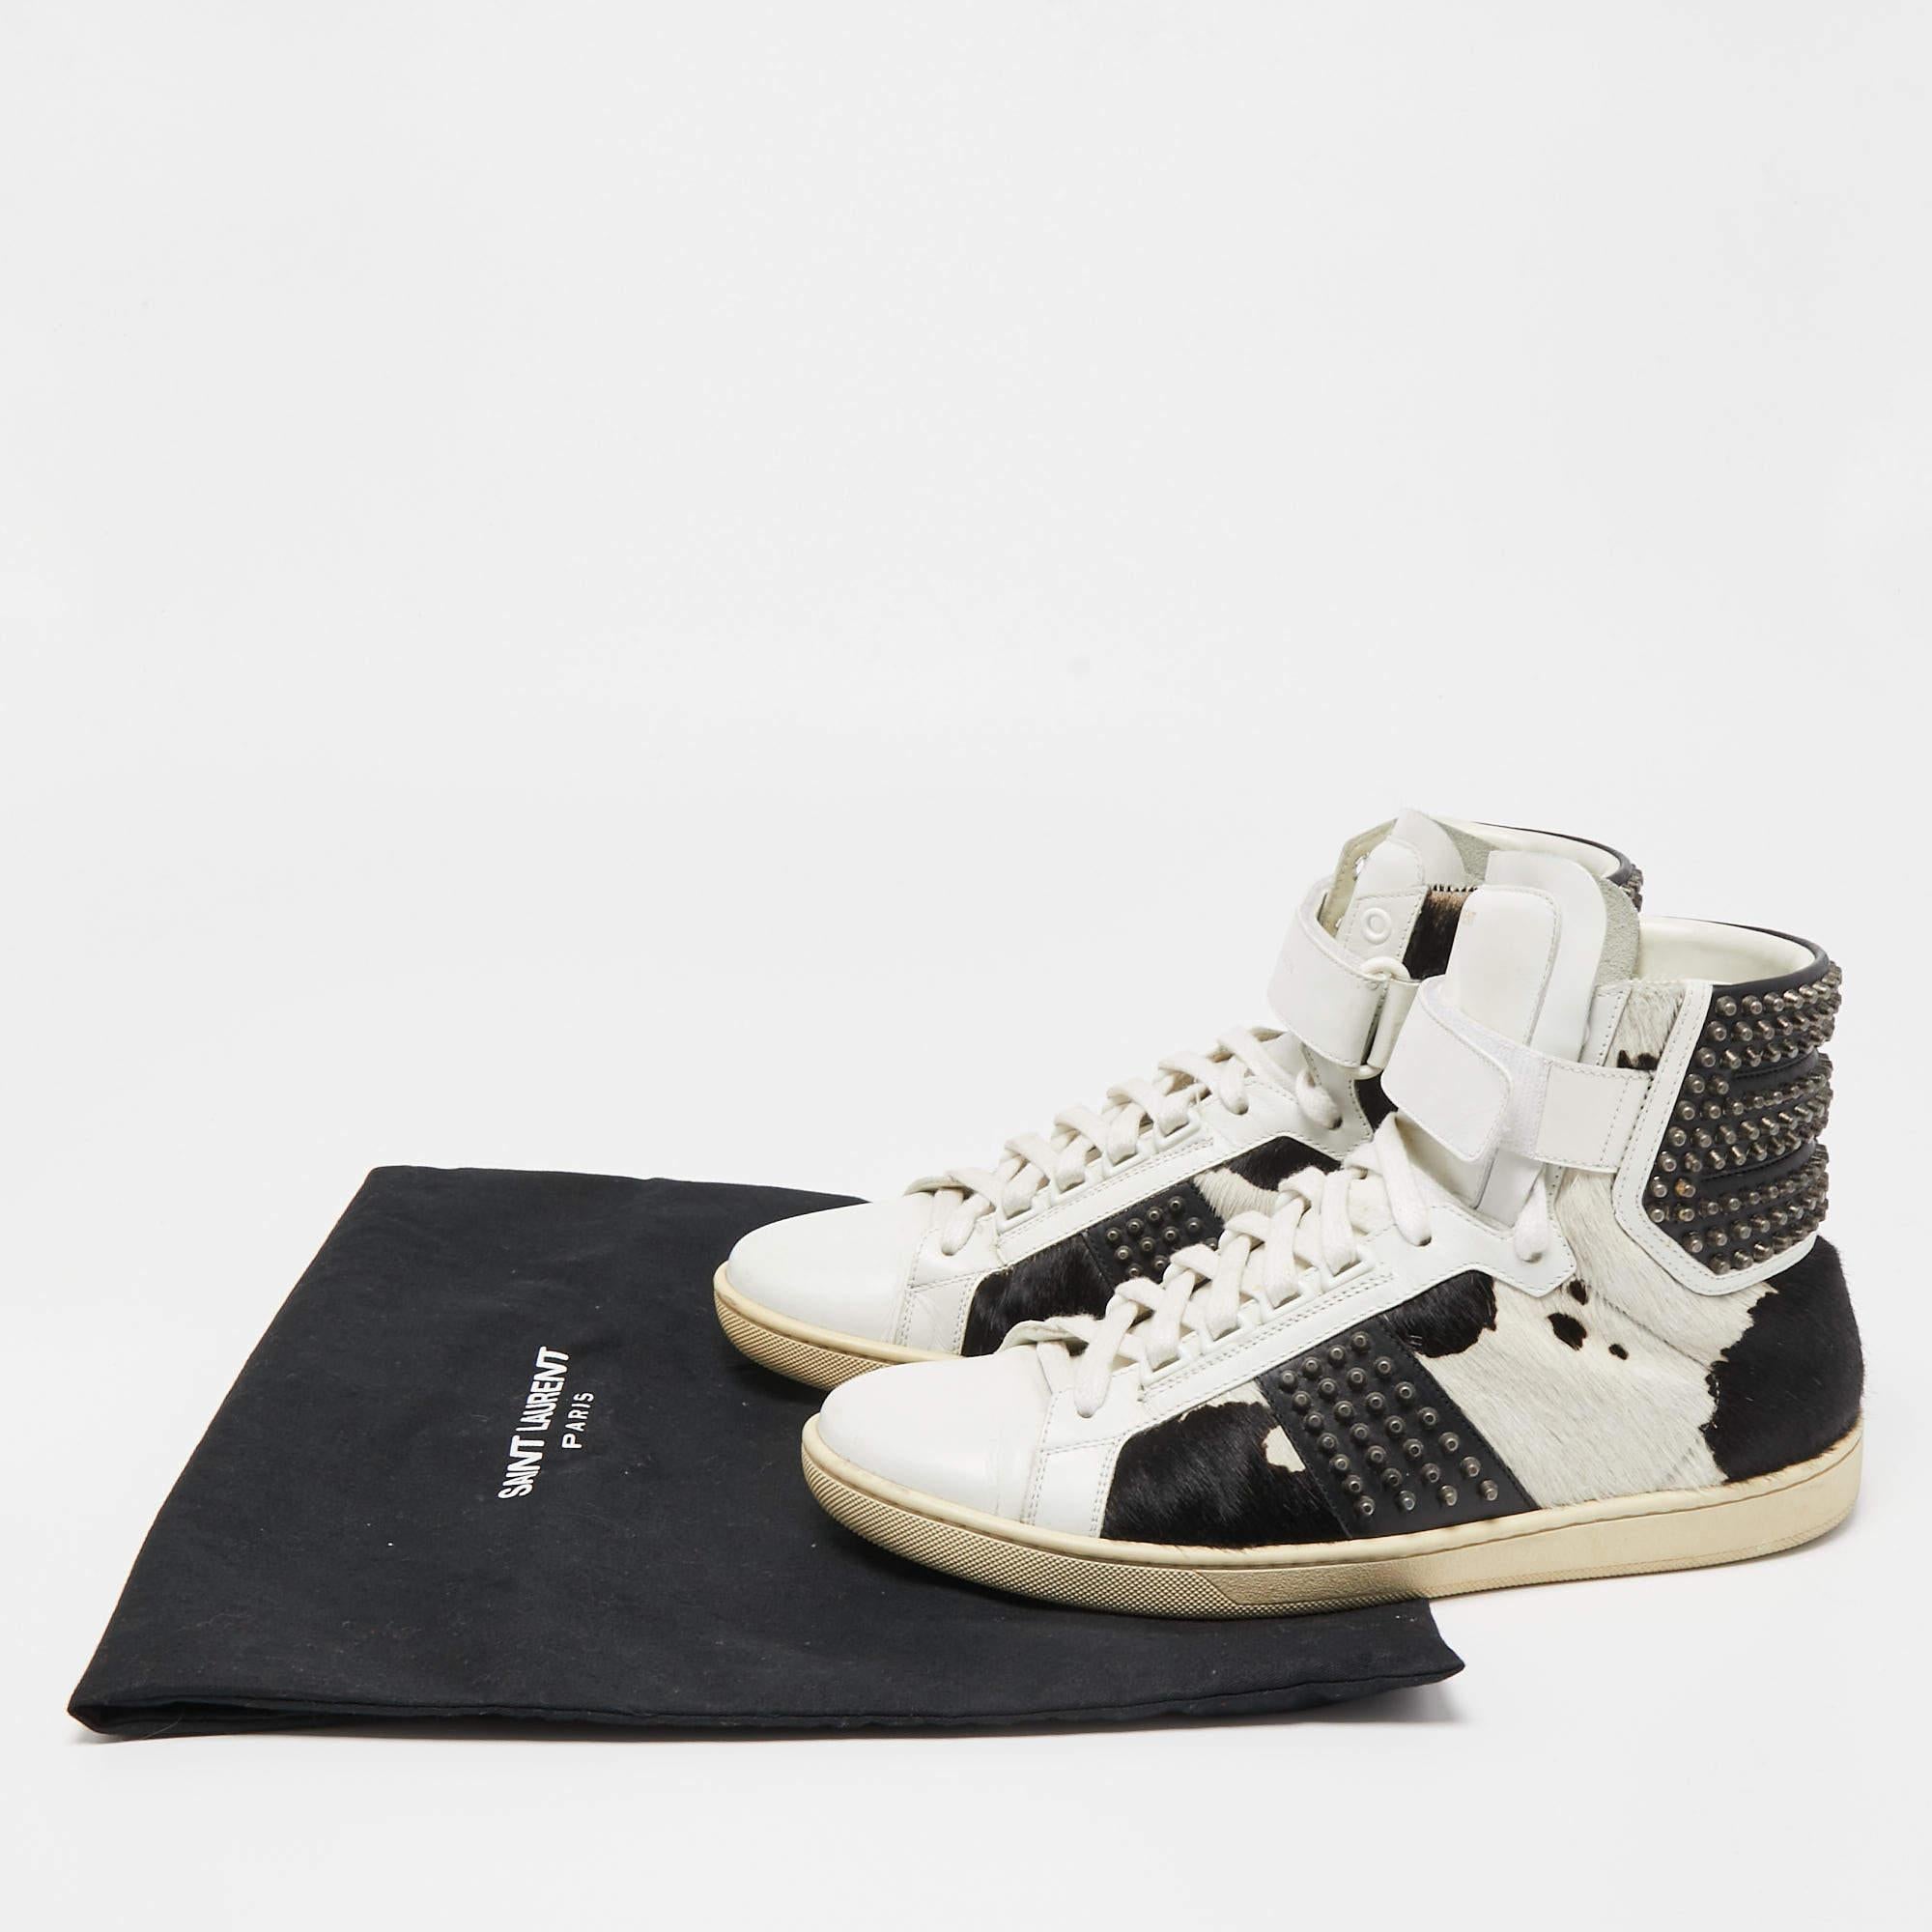 Saint Laurent Leather and Calf Hair Studded High Top Sneakers Size 41 For Sale 4